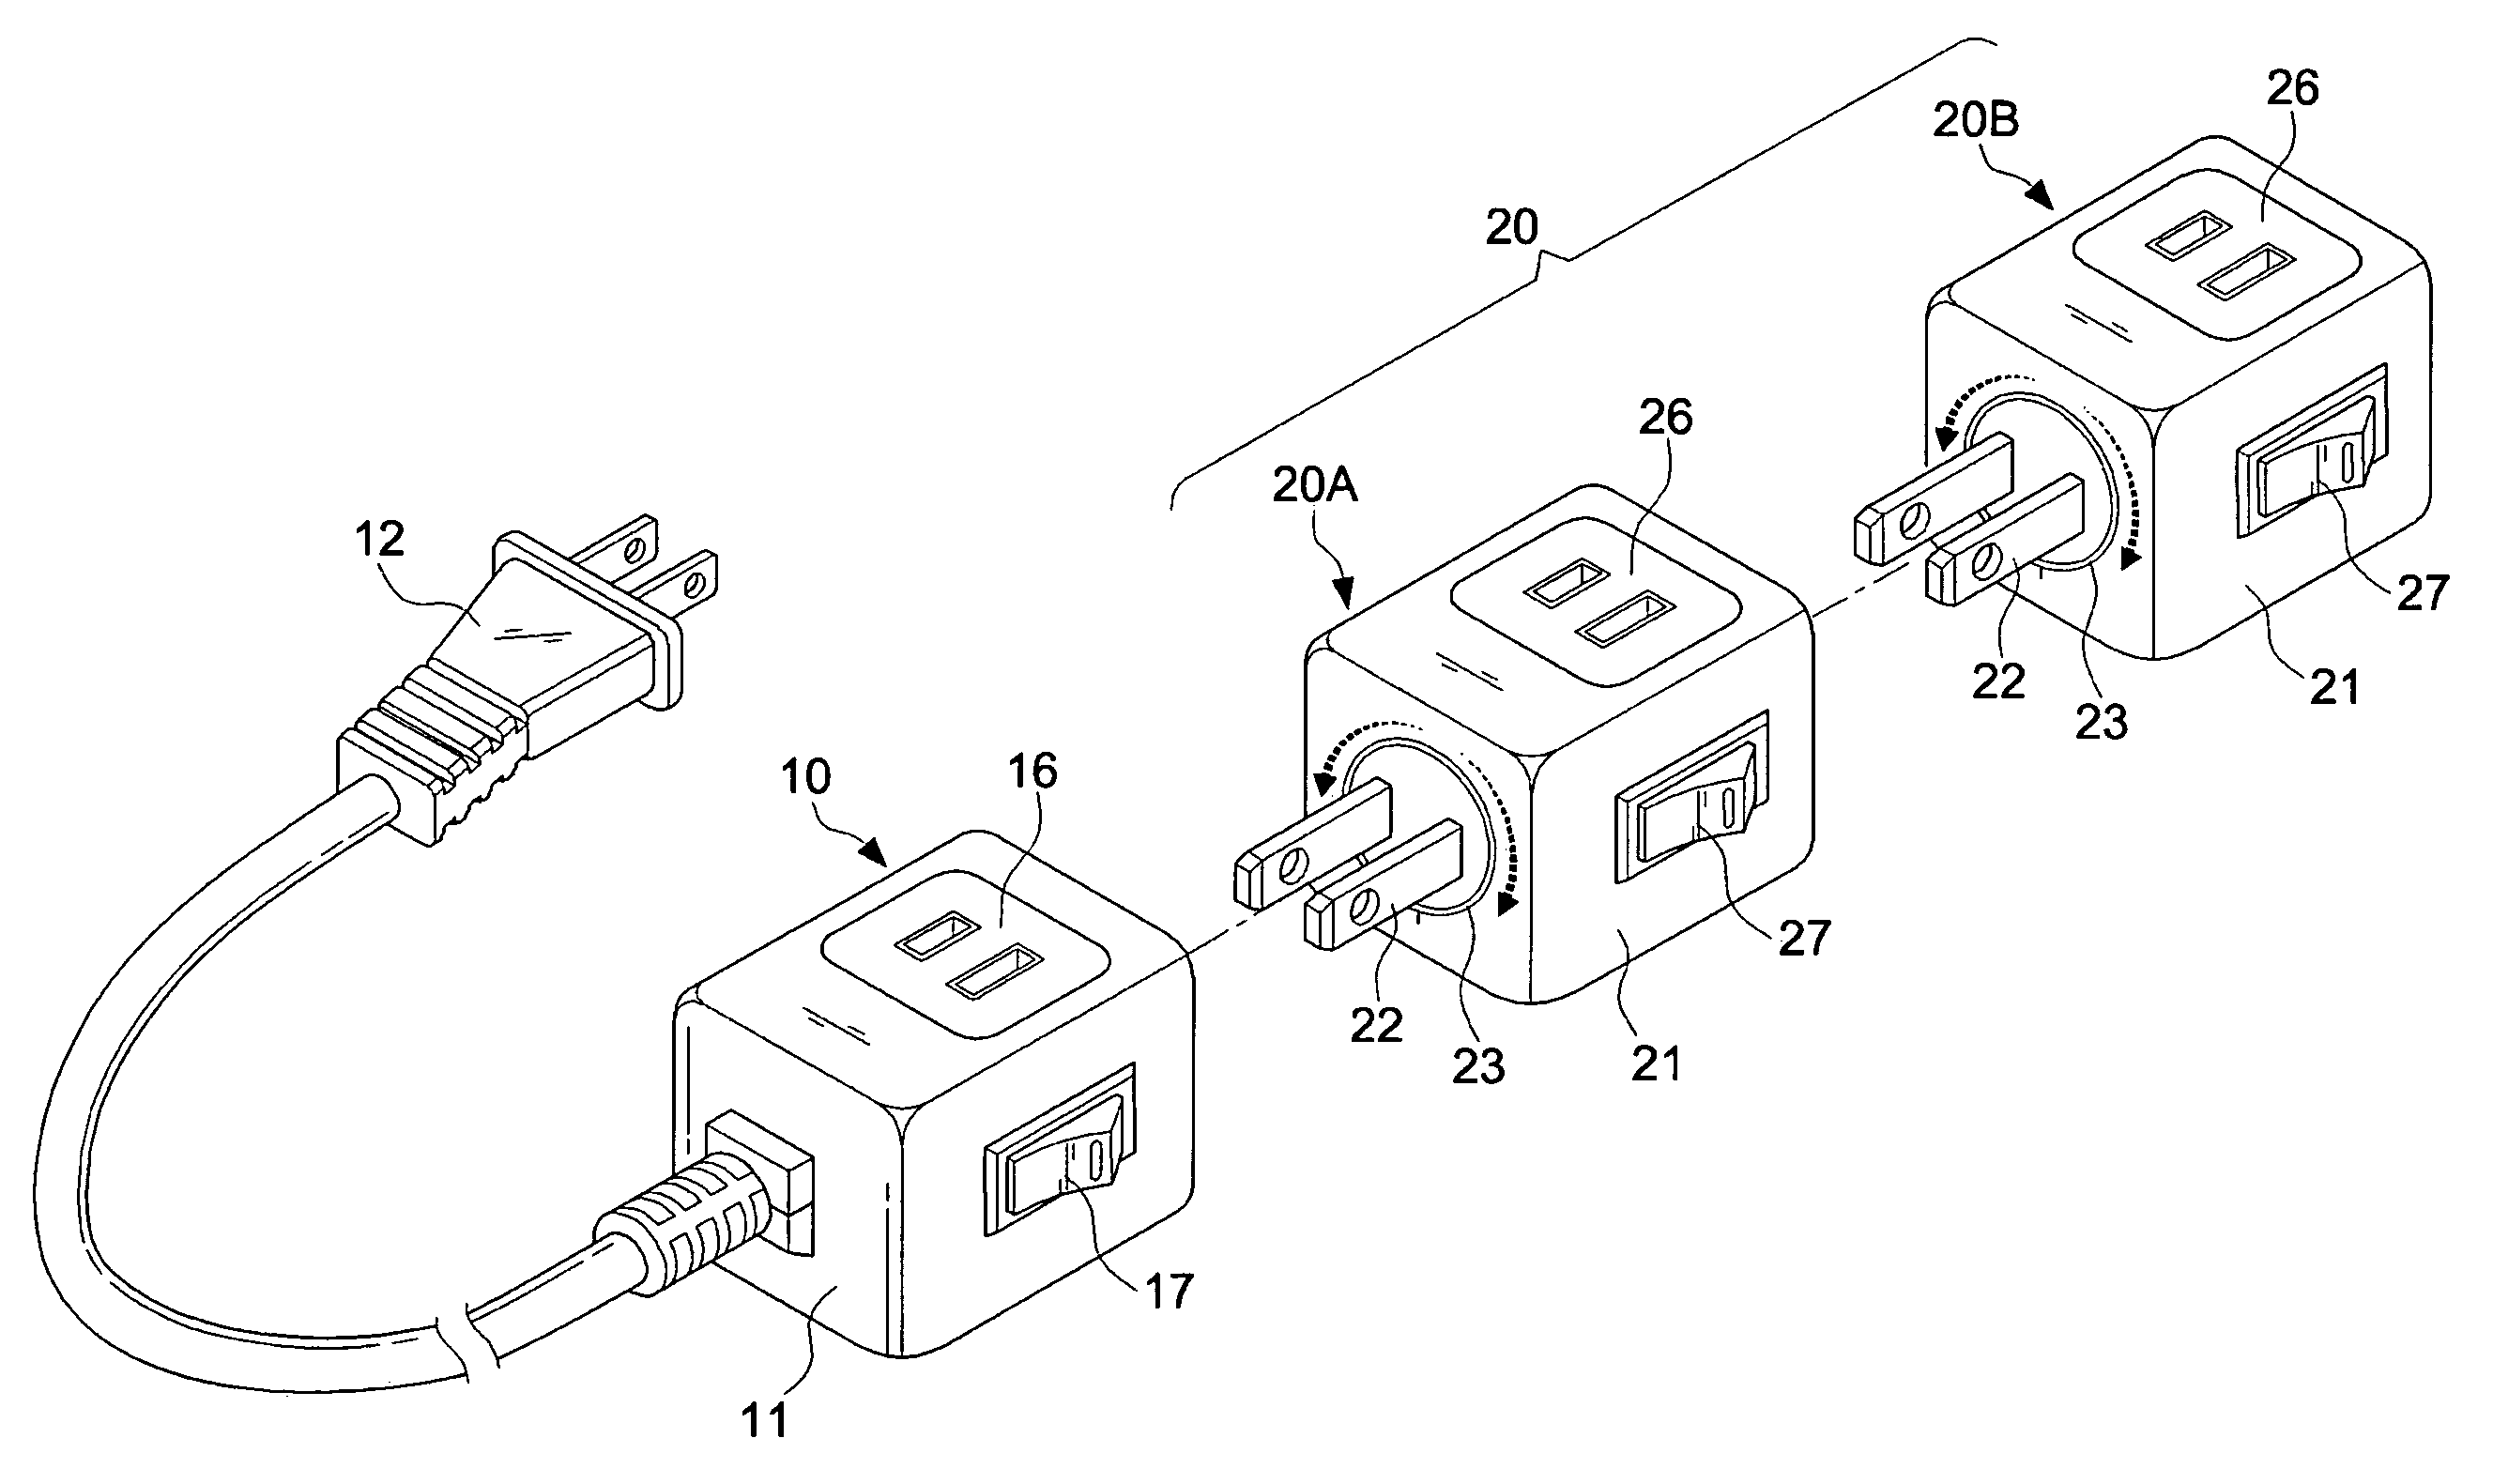 Tandem-connected rotatable receptacle unit